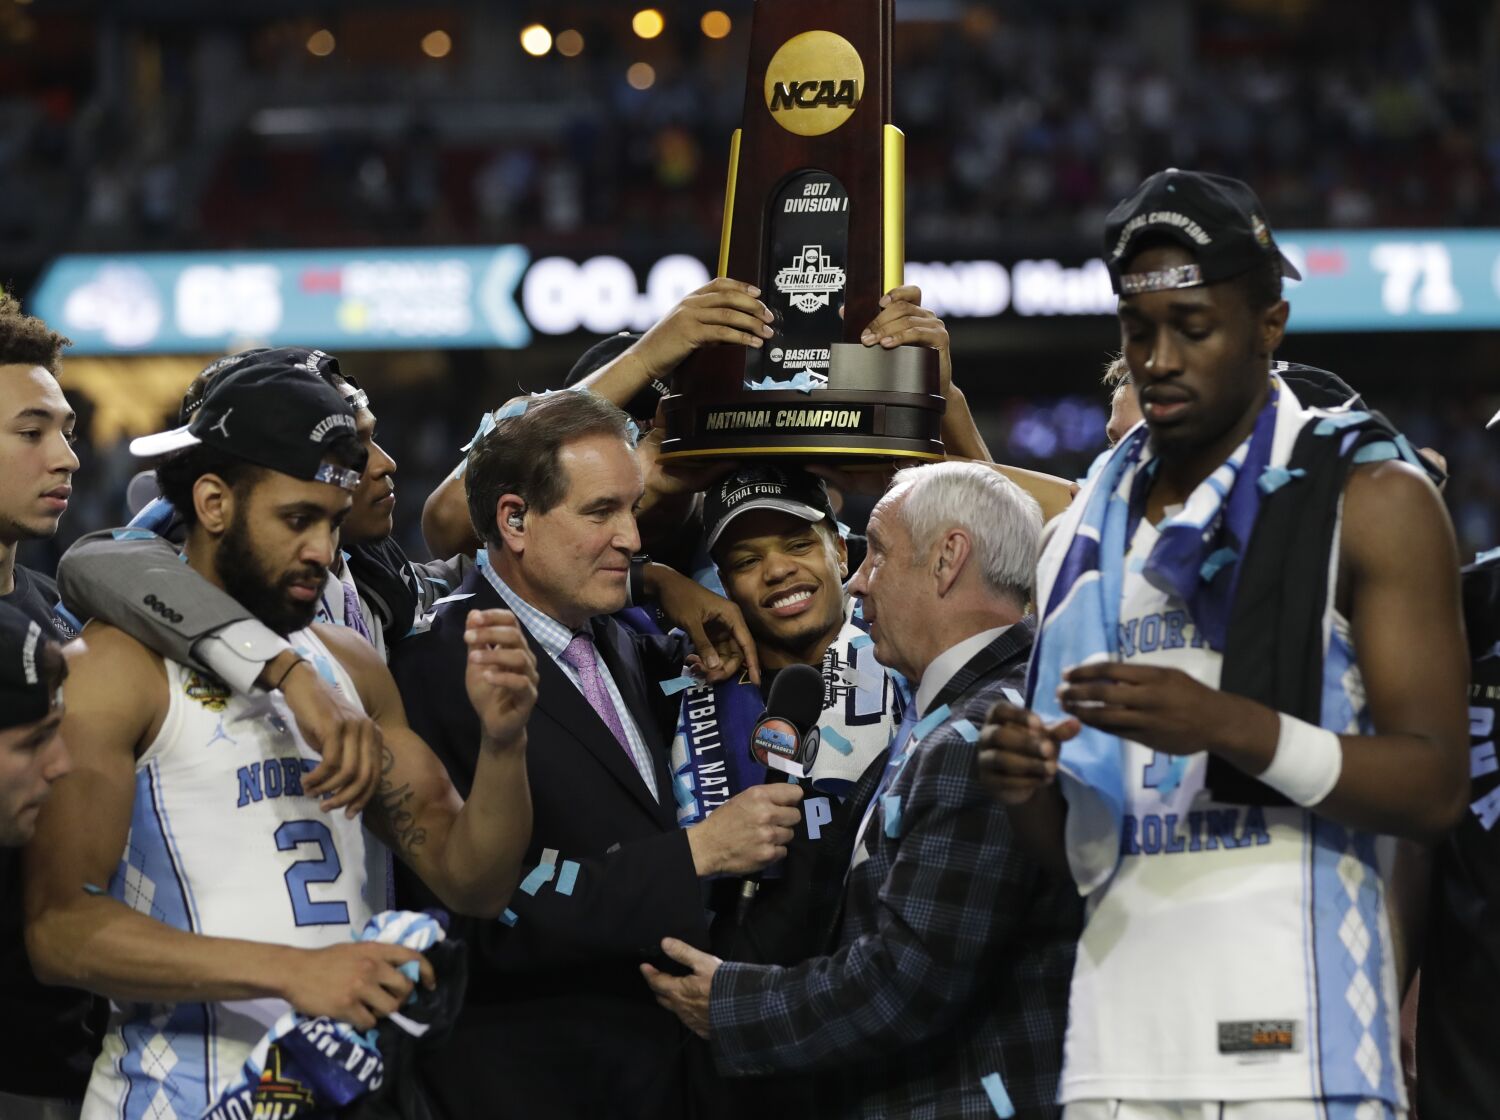 How many times has a No. 1 seed won the NCAA men's basketball tournament? 